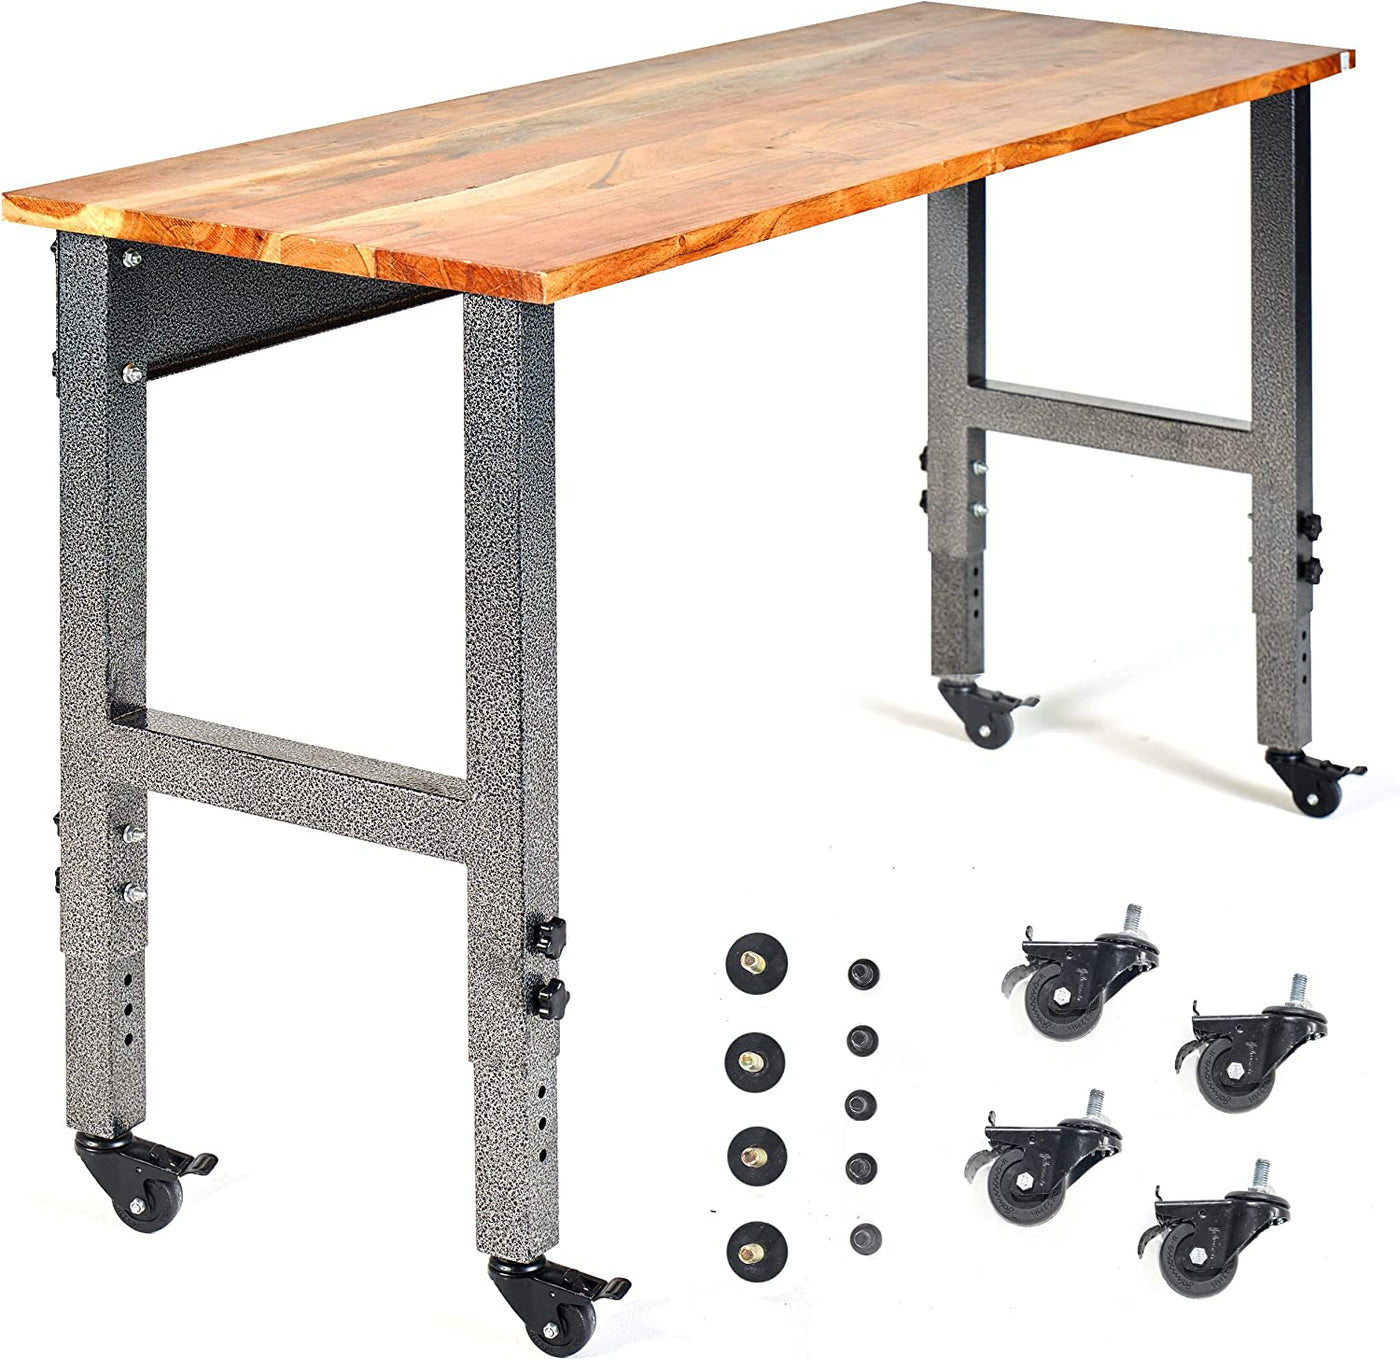 Fedmax Work Bench - 61" Rolling Portable Workbench for Garage-$170